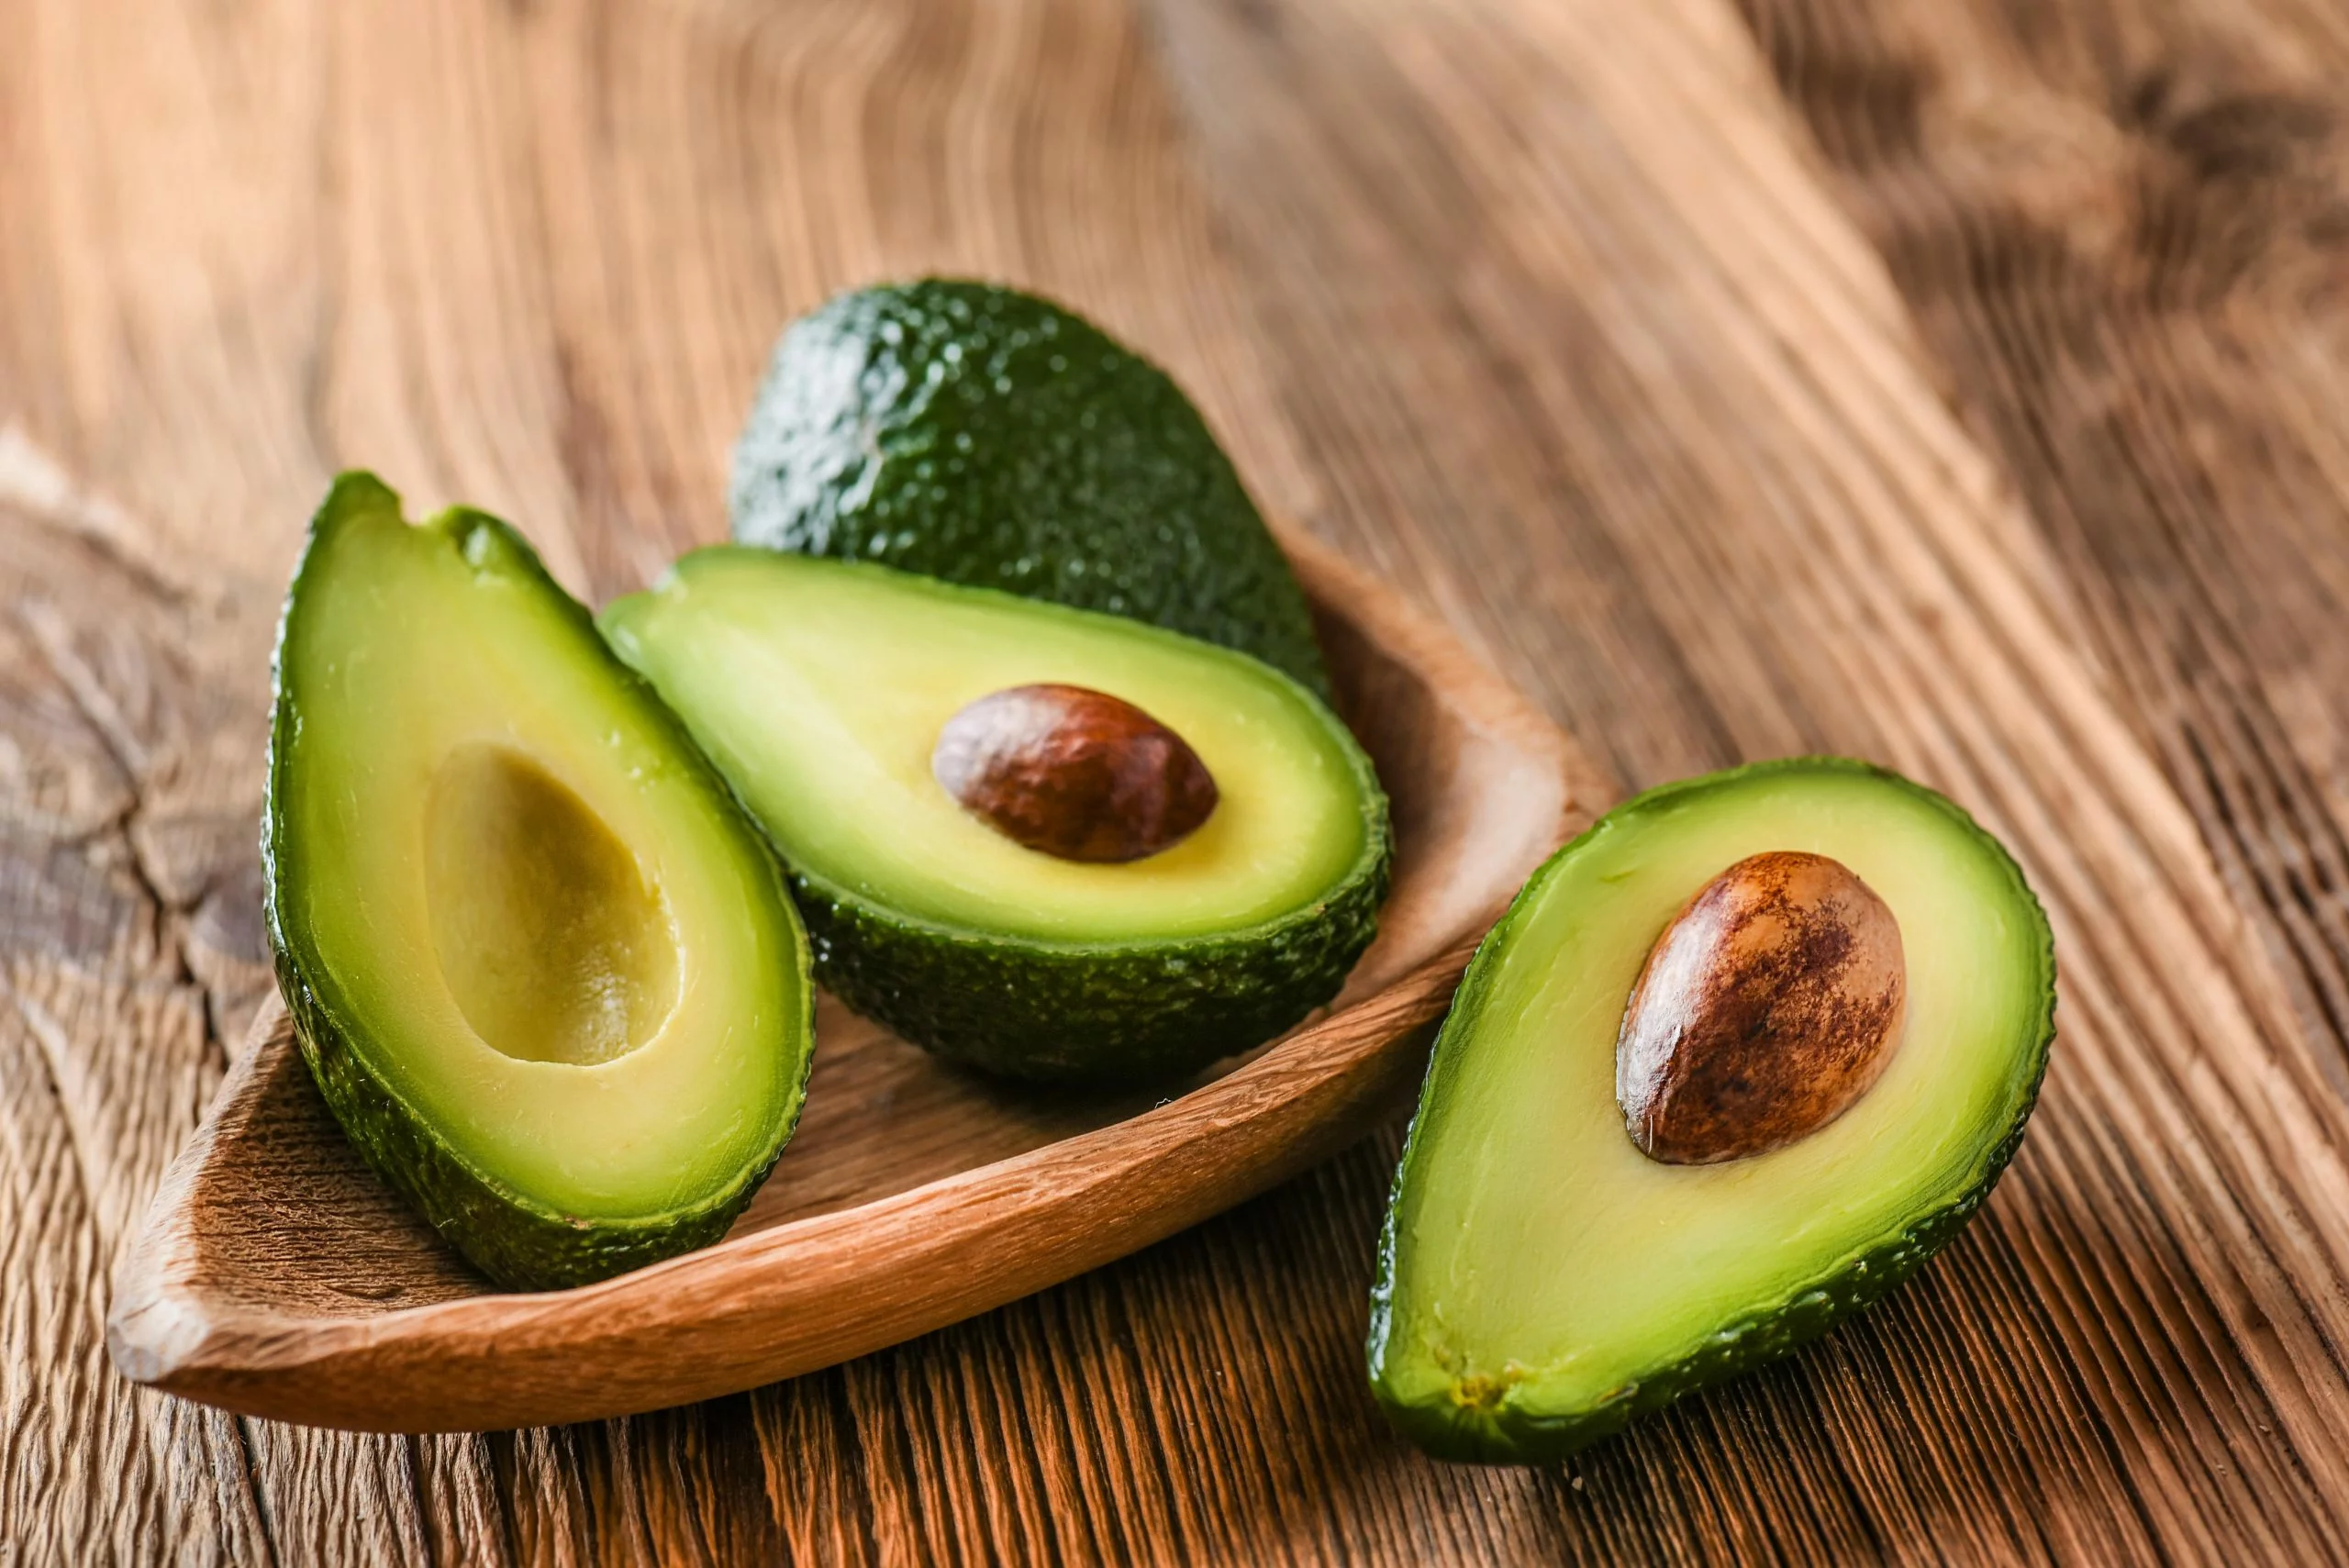 What are the Facts about Avocados?